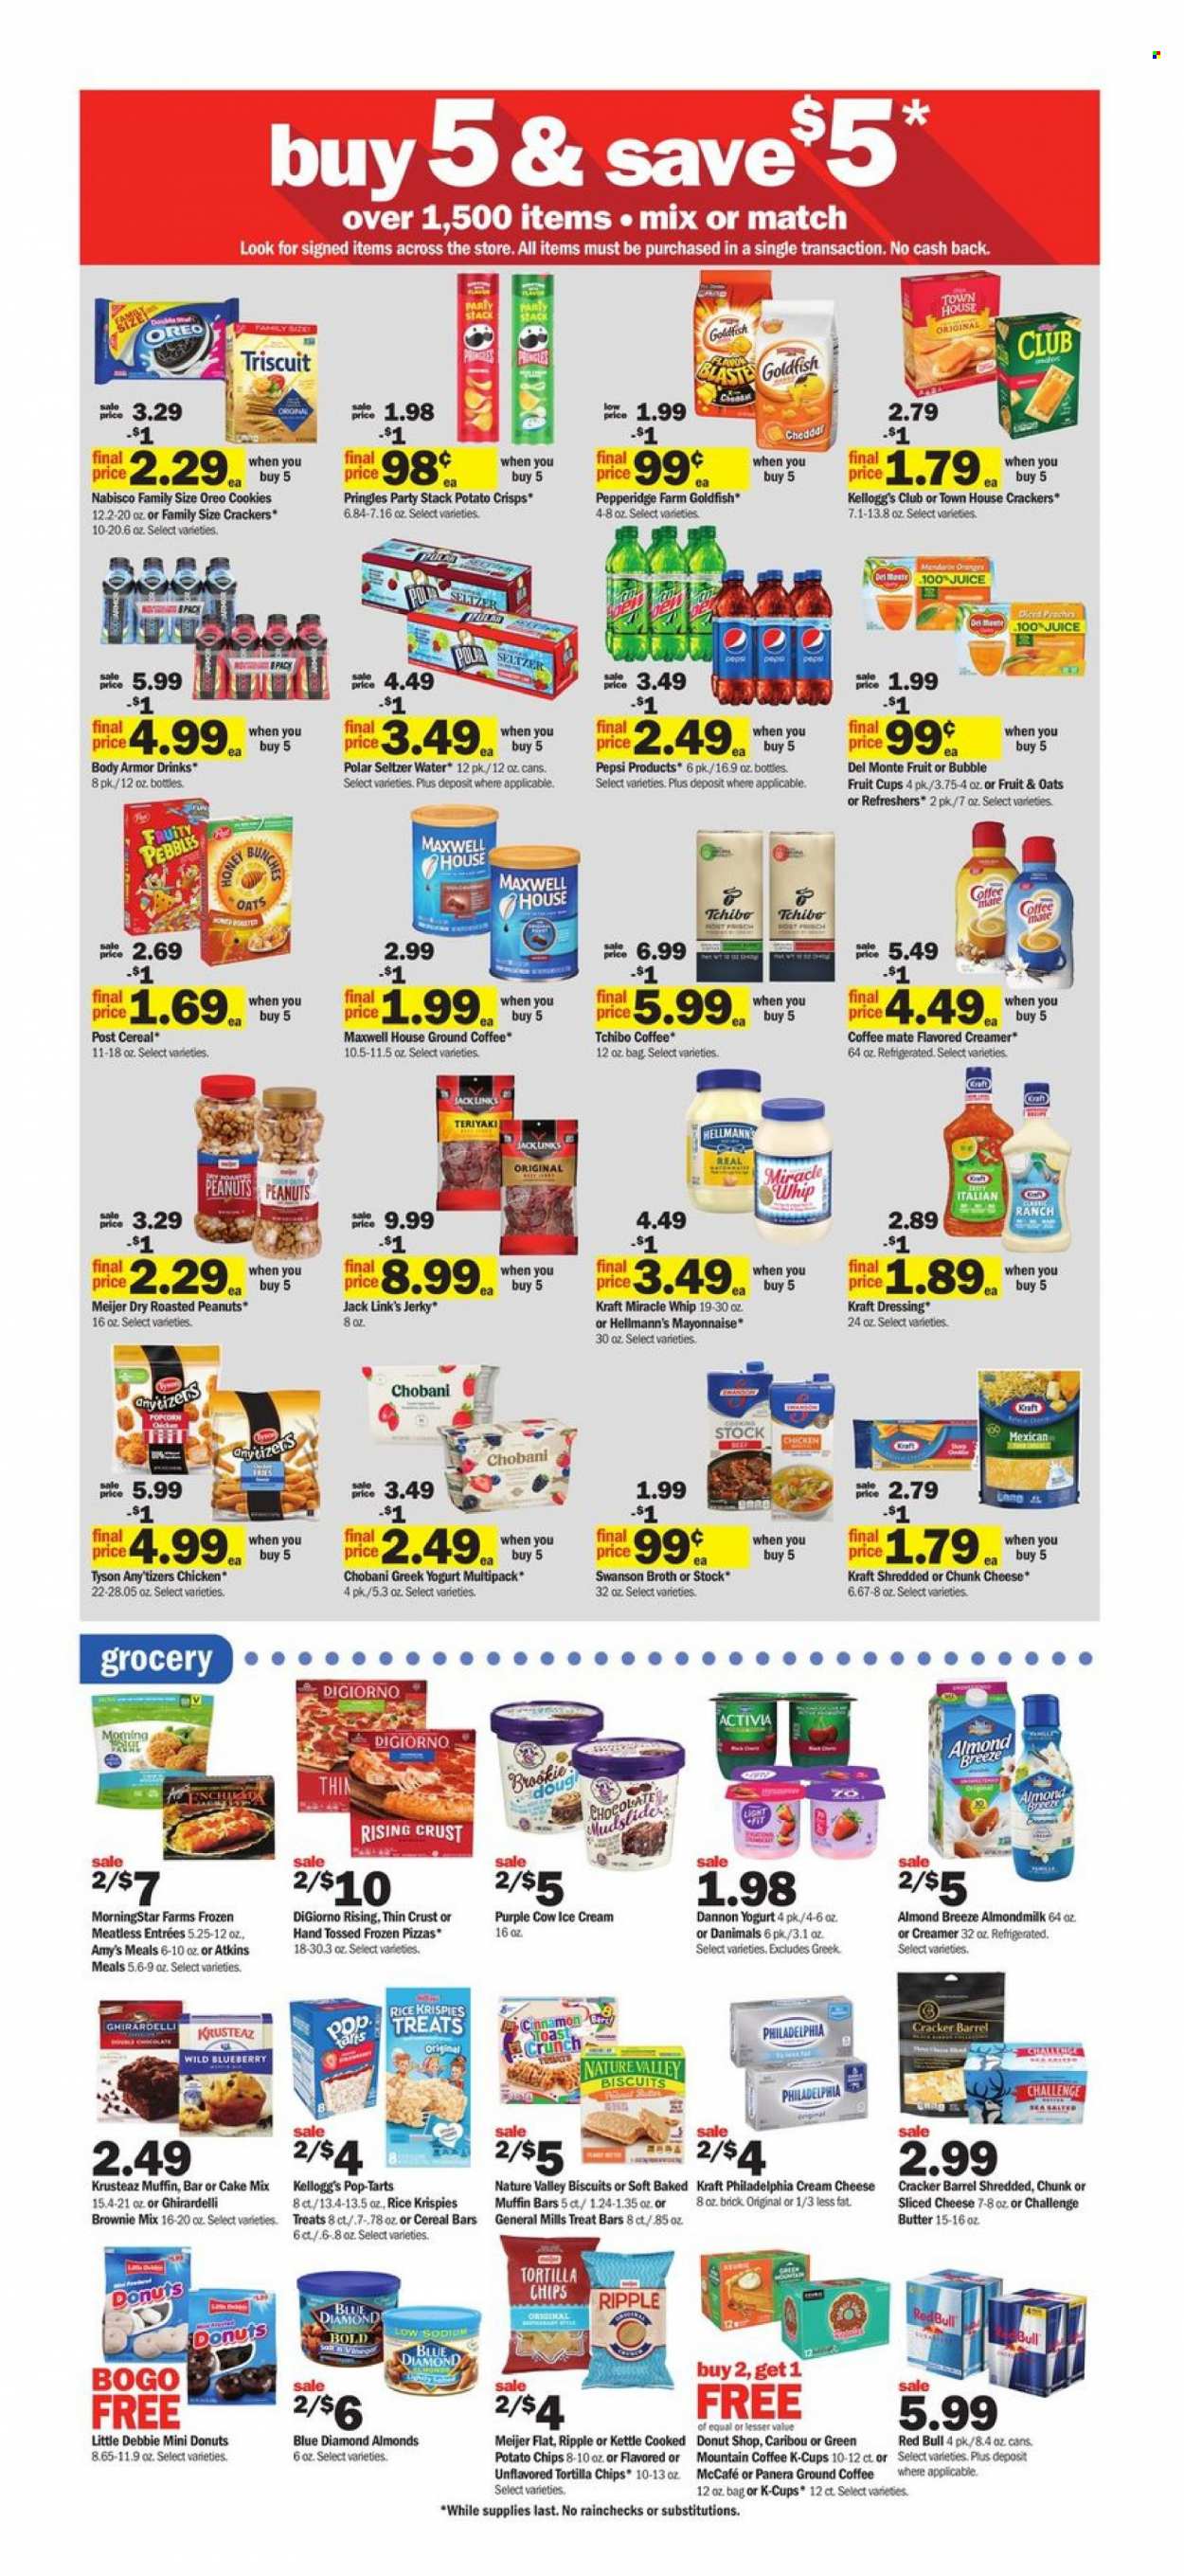 thumbnail - Meijer Flyer - 10/17/2021 - 10/23/2021 - Sales products - fruit cup, muffin, brownie mix, cake mix, pizza, MorningStar Farms, Kraft®, jerky, cream cheese, sliced cheese, Philadelphia, chunk cheese, greek yoghurt, Oreo, yoghurt, Chobani, Dannon, Danimals, almond milk, Coffee-Mate, Almond Breeze, butter, suet, creamer, mayonnaise, Miracle Whip, Hellmann’s, ice cream, cookies, cereal bar, crackers, Kellogg's, biscuit, Pop-Tarts, Ghirardelli, tortilla chips, potato crisps, potato chips, Pringles, Goldfish, Jack Link's, broth, Rice Krispies, Fruity Pebbles, Nature Valley, cinnamon, dressing, roasted peanuts, peanuts, Blue Diamond, Pepsi, juice, Body Armor, Red Bull, seltzer water, Maxwell House, ground coffee, coffee capsules, McCafe, K-Cups. Page 3.